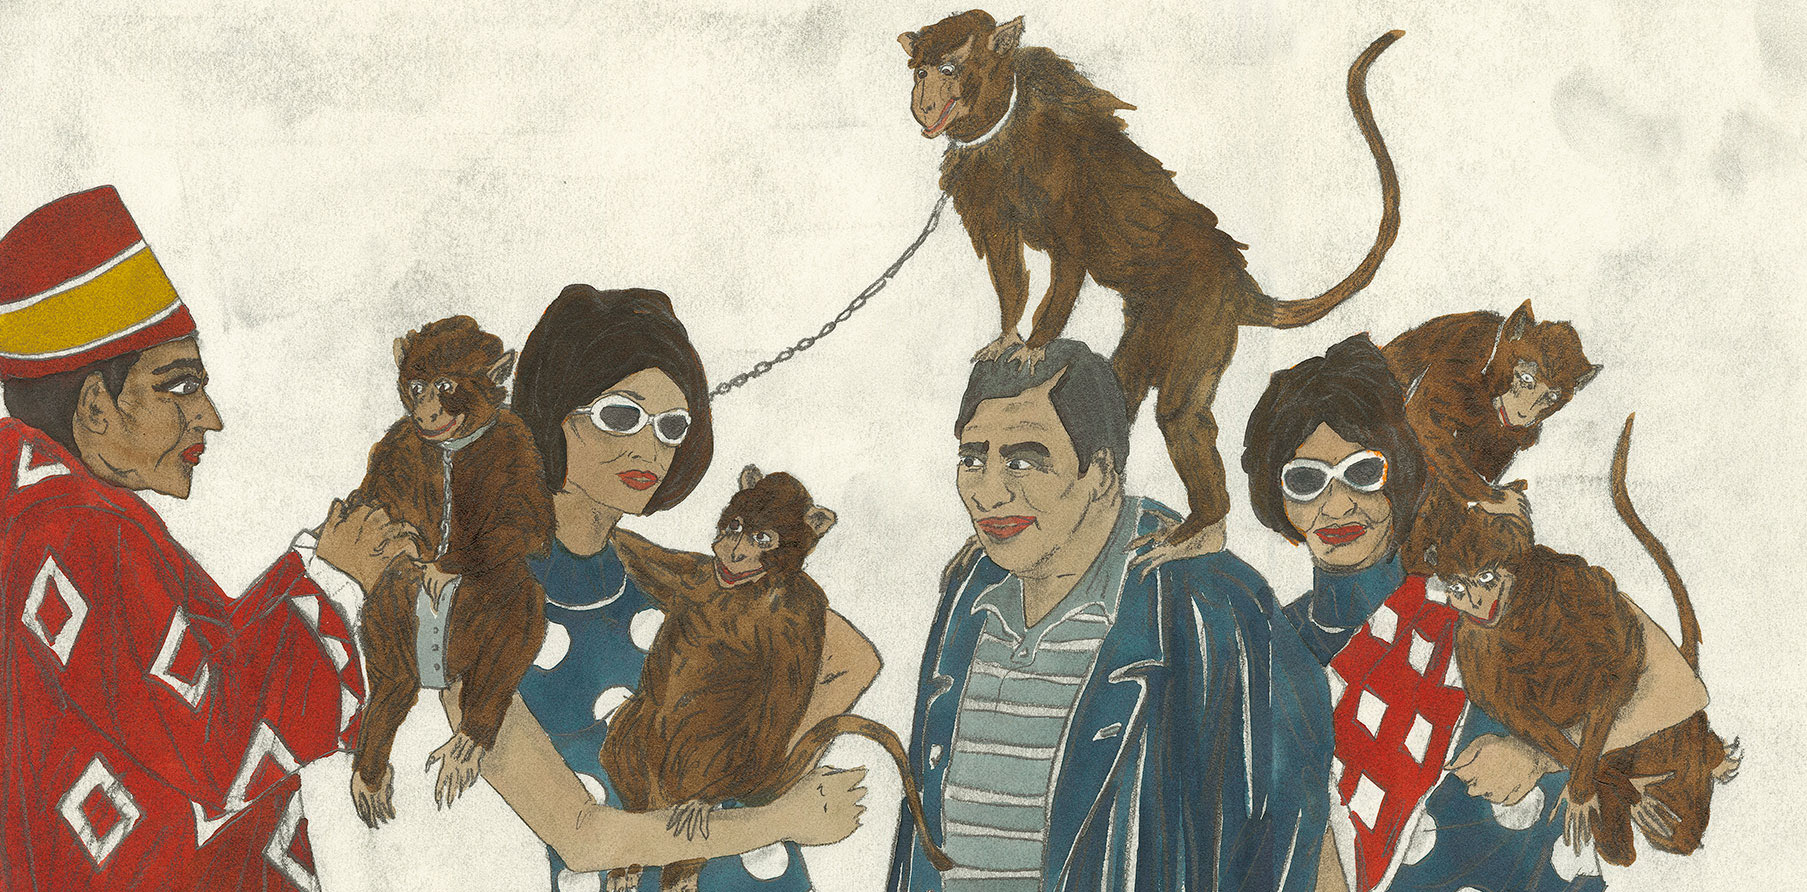 A detail from a work by Marcel Dzama, titled Tourists and monkey trainers on Jemaa el-Fnaa marketplace, dated 2018.